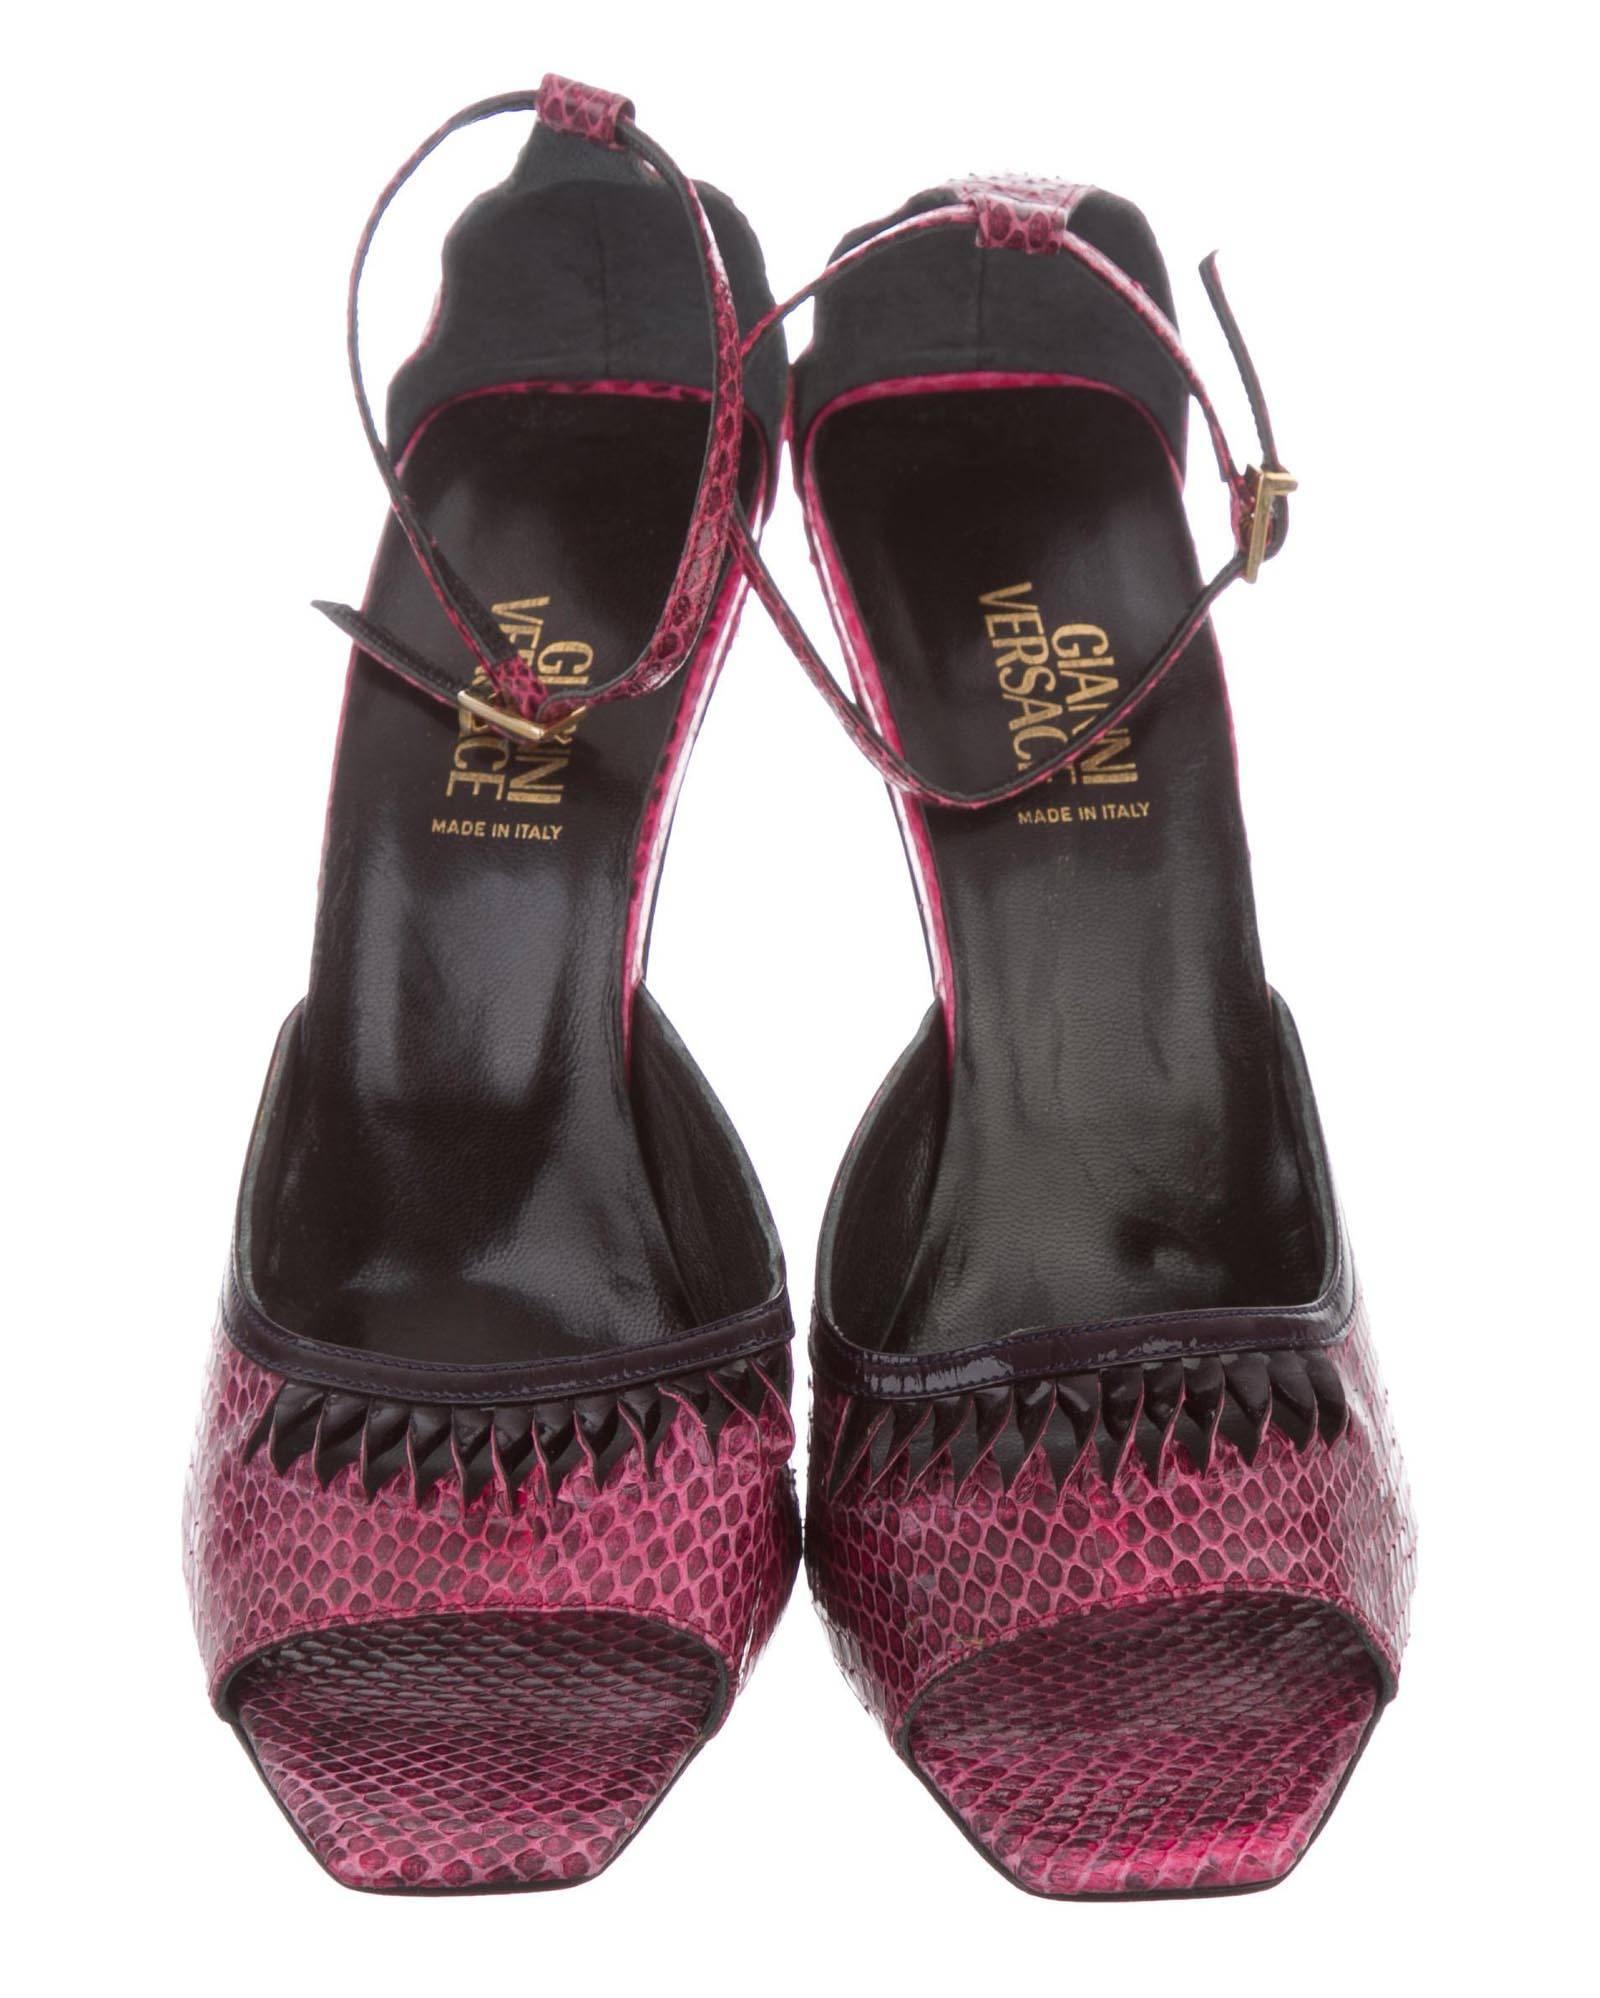 Gianni Versace Vintage Snakeskin Peep-toe Raspberry Sandals
F/W 2000 Runway Collection
Designer size 39.5 - US 9.5
Snakeskin, Patent Leather Trim, Gold-tone Buckle Closures at Ankle Straps, Leather Sole with Medusa Logo.
Covered Heel - 4.5